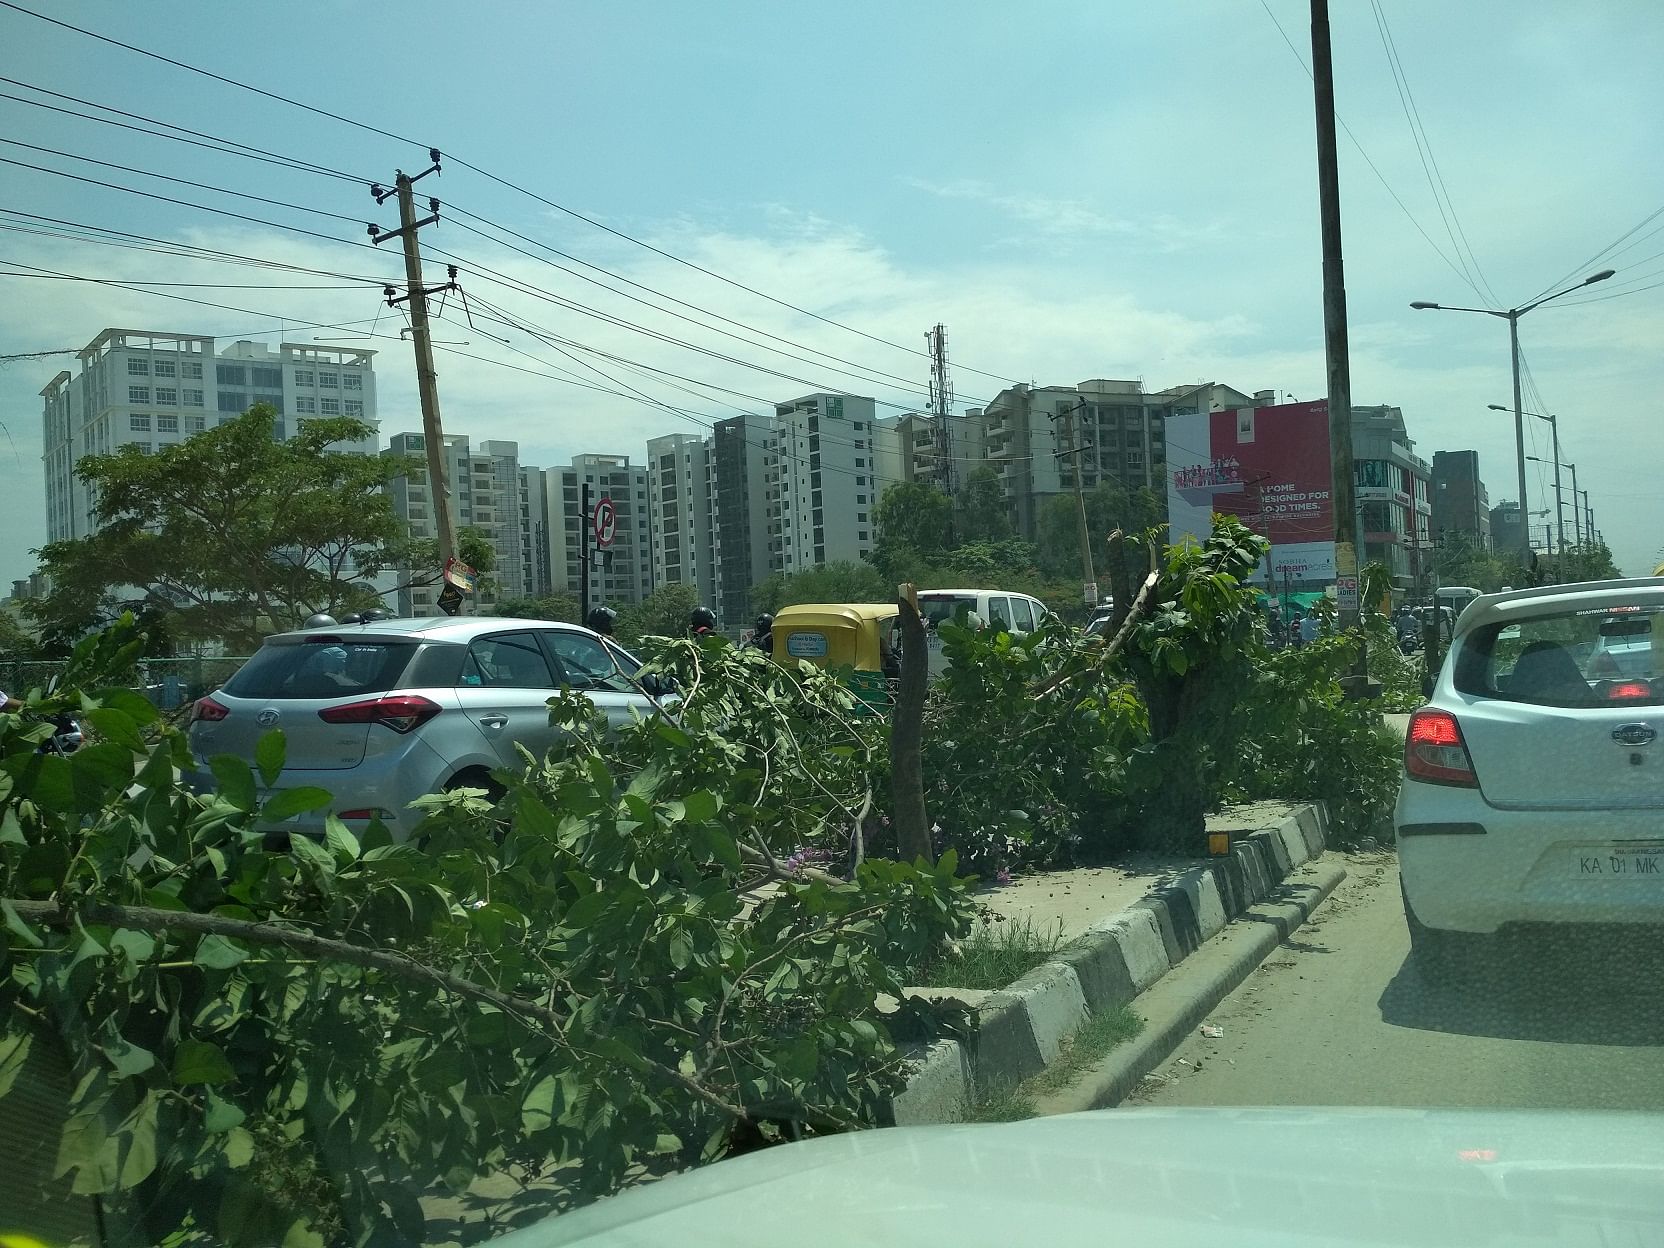 Trees lining this road in Marathahalli were chopped so that the hoarding in the distance gets seen better.